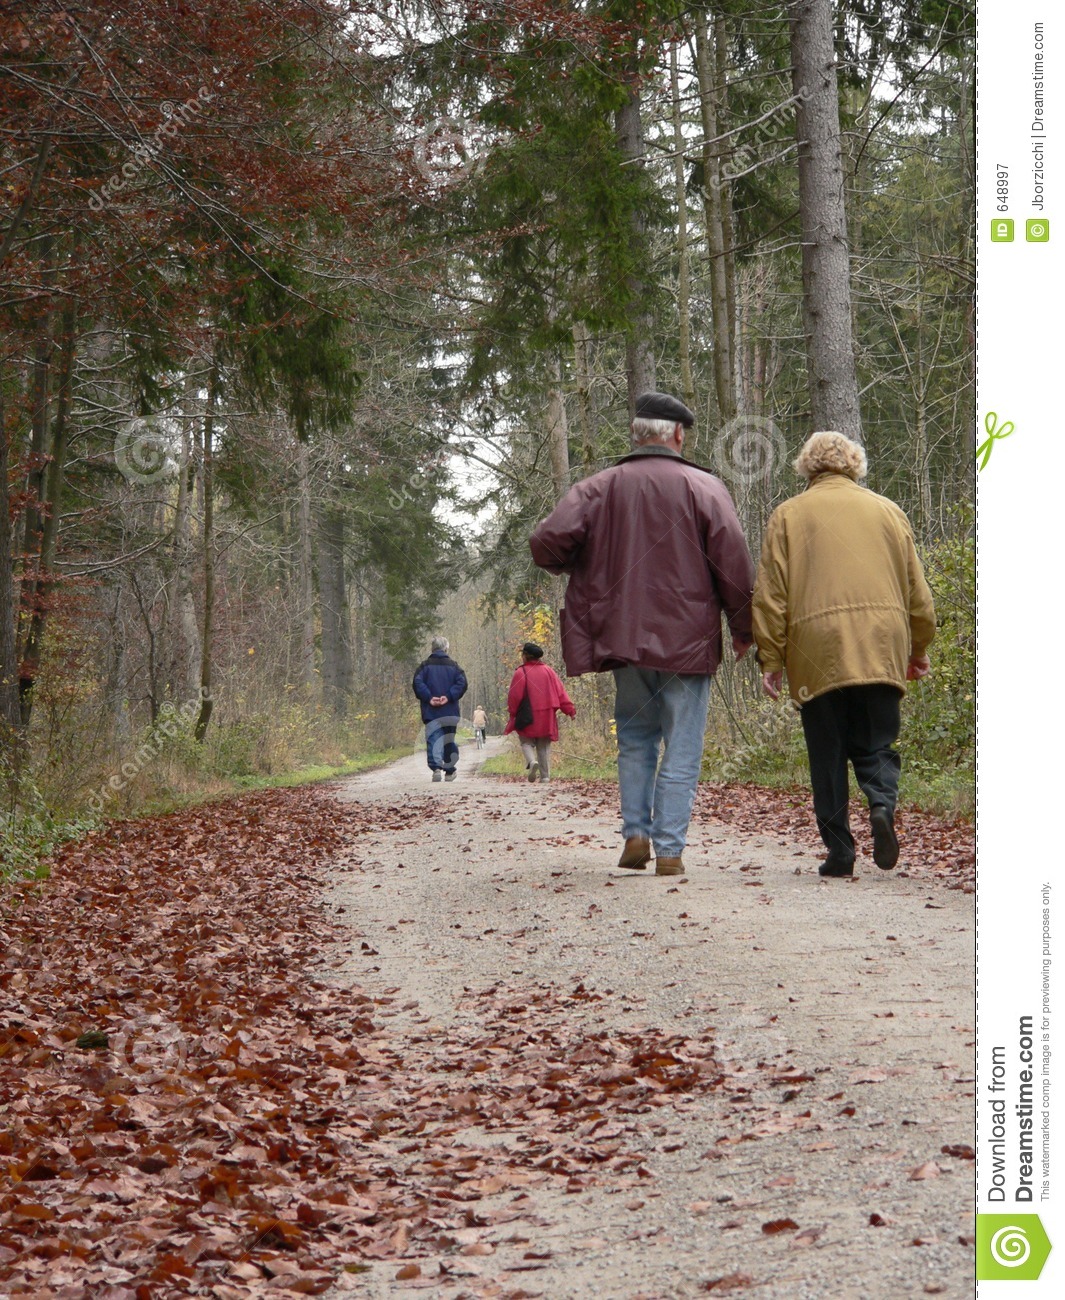 Old People Walking Outdoor Royalty Free Stock Photography   Image    